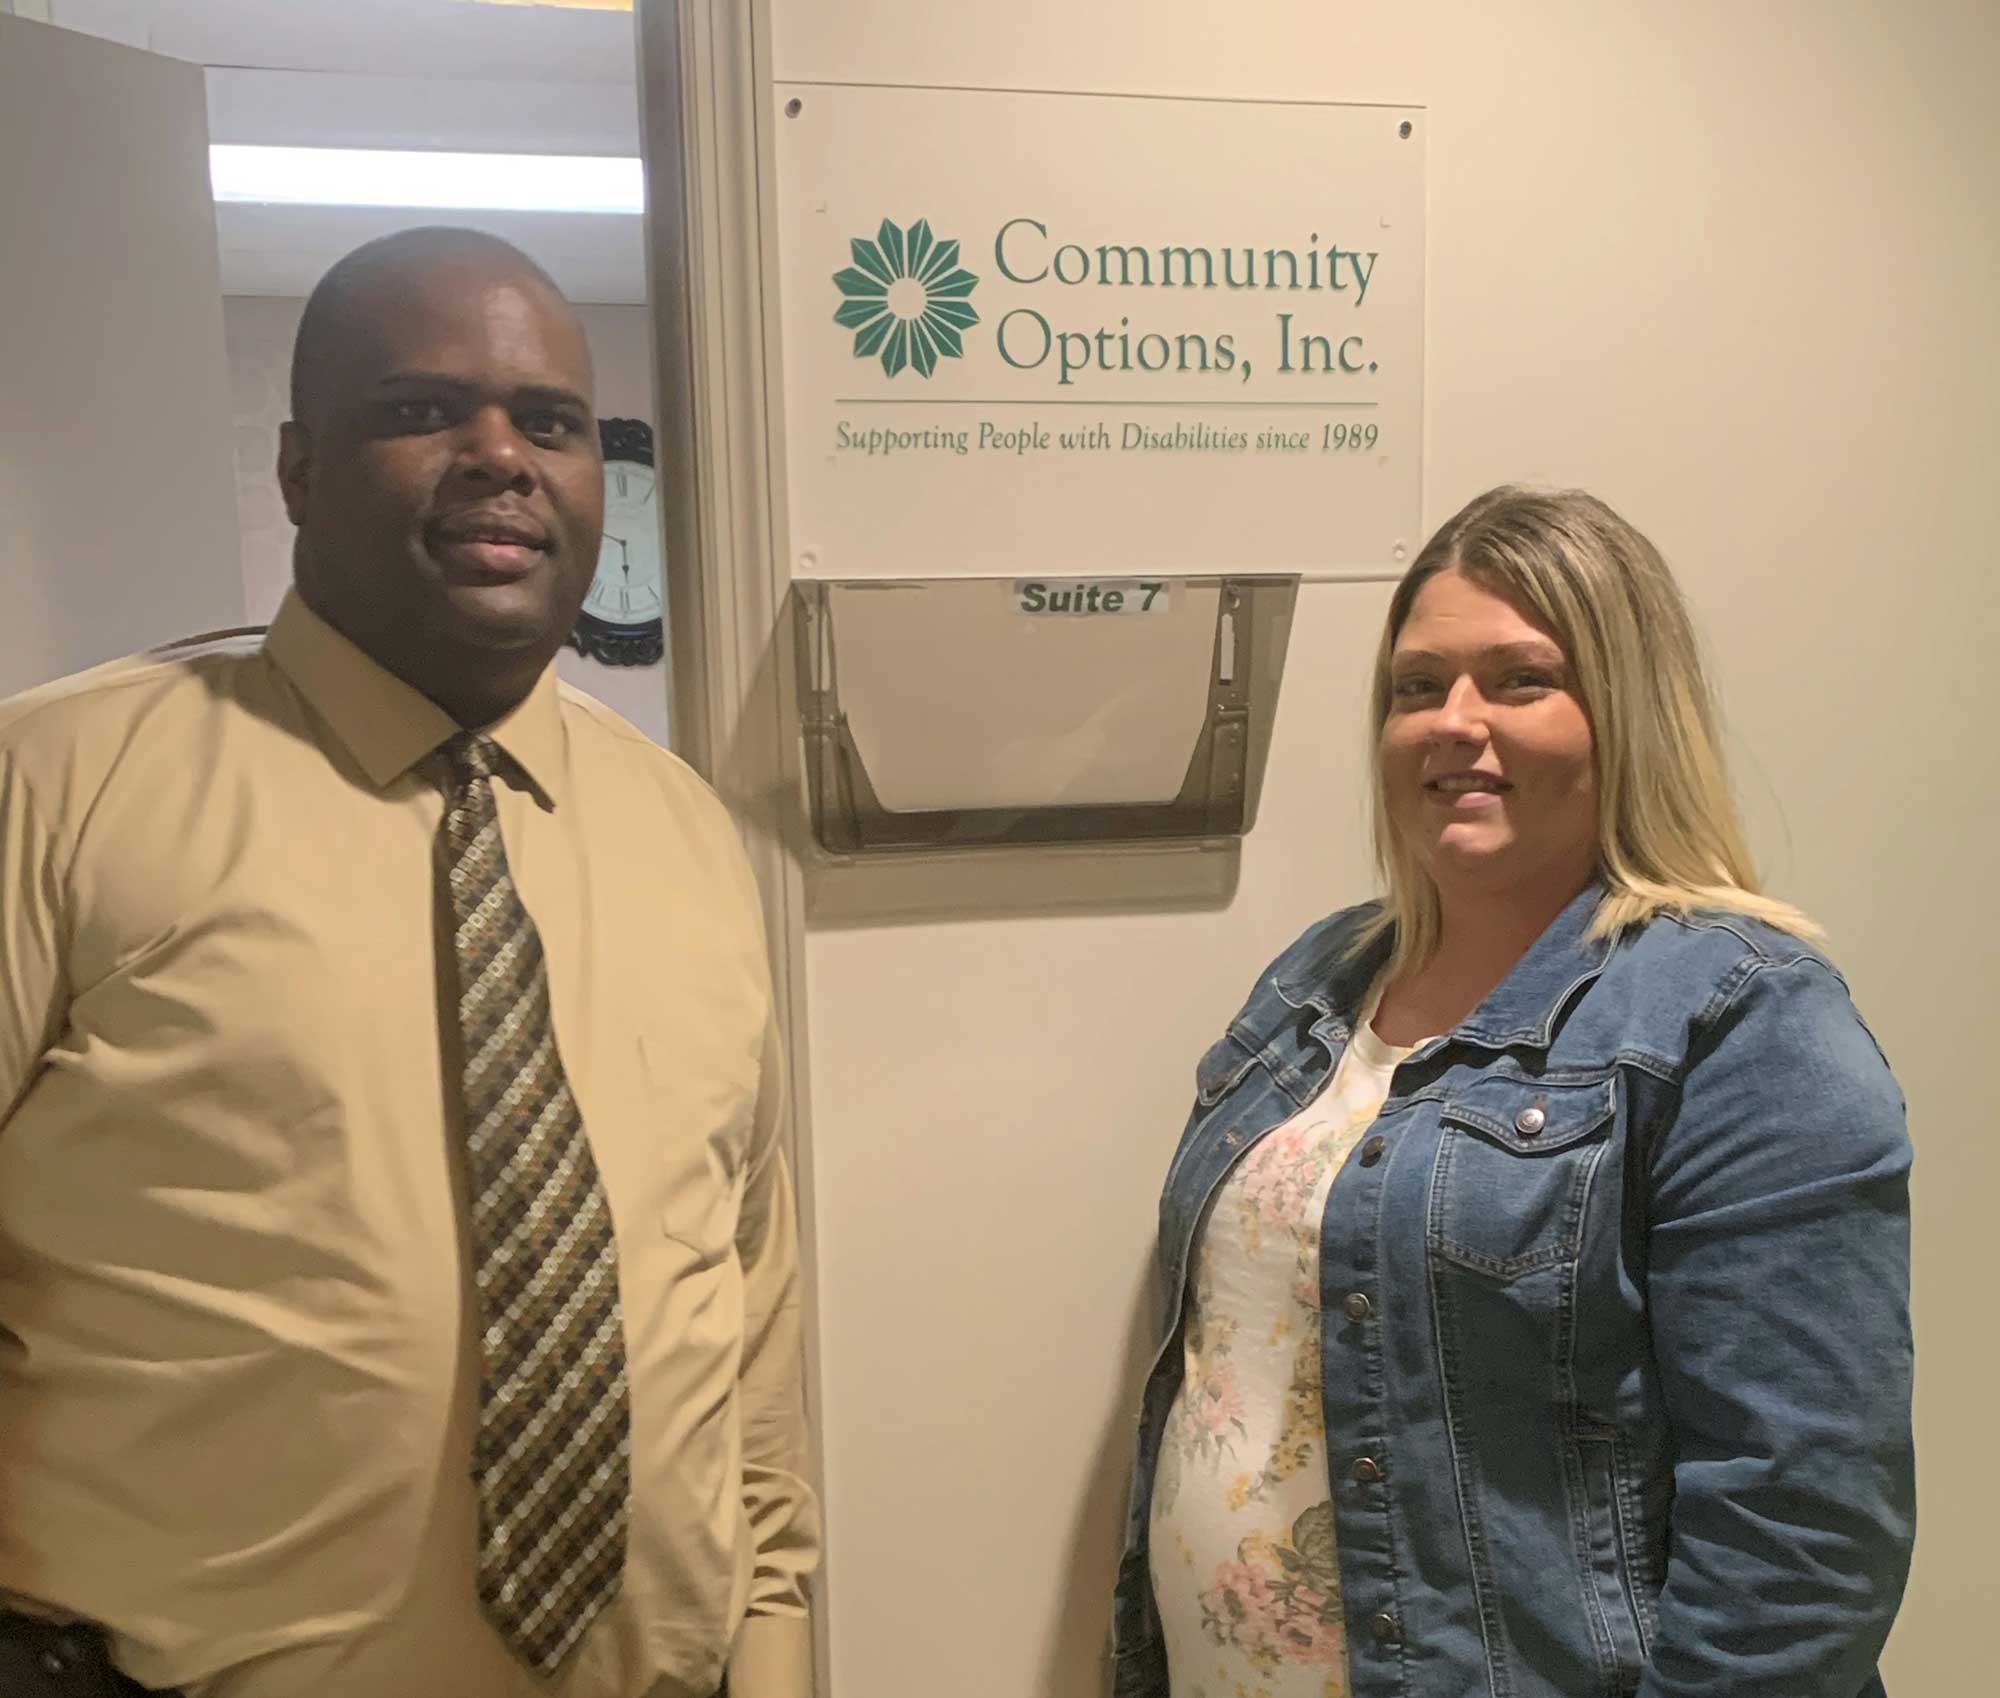 Community Options, Inc. of Franklin was established in 2020 to provide community-based options for residential and employment support services to individuals with disabilities living in Williamson, Maury, Rutherford, and Bedford counties.